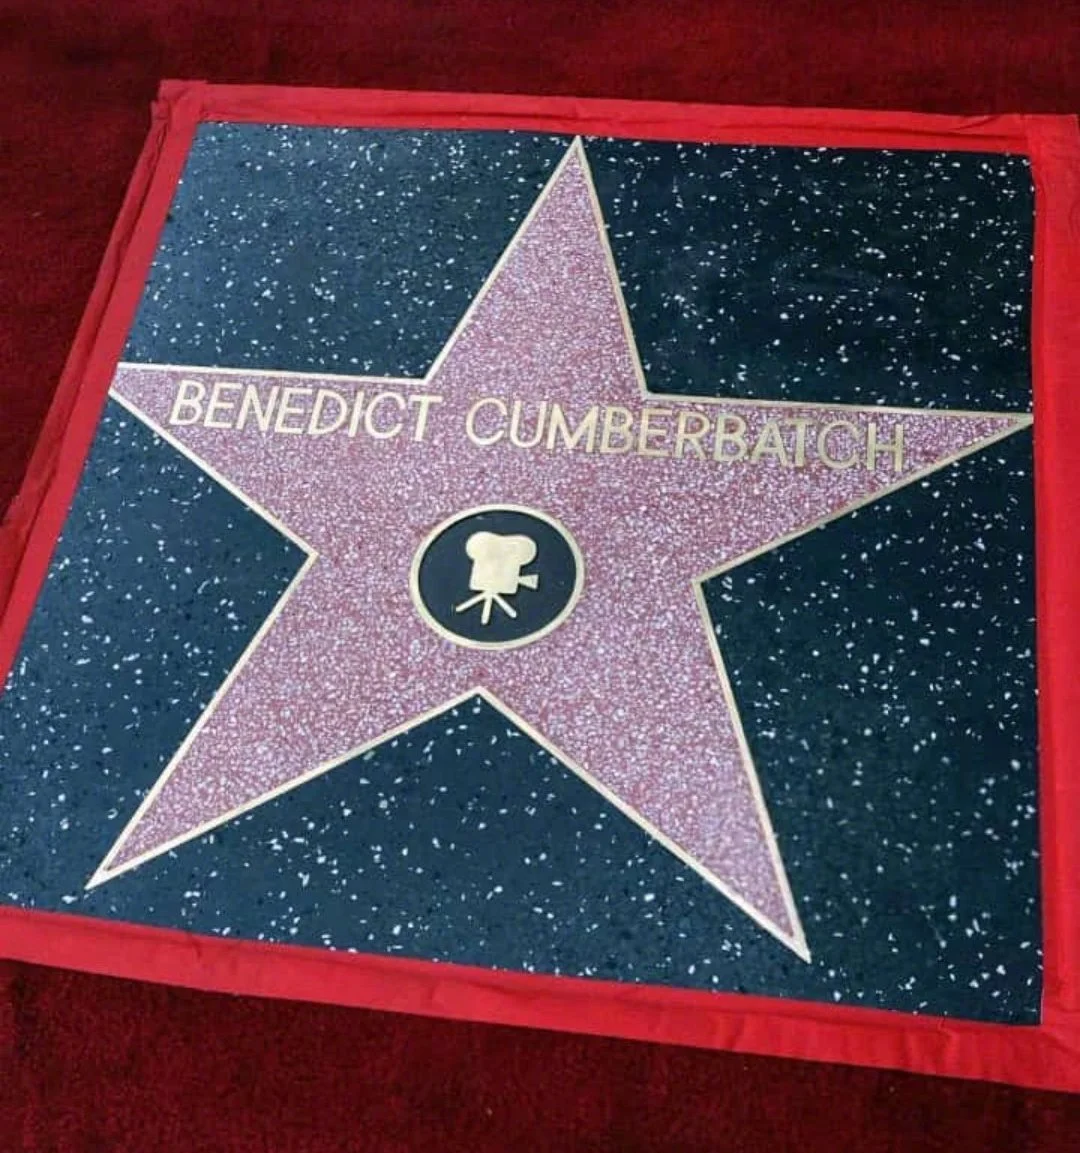 benedict-cumberbatch-leaves-a-star-that-belongs-to-him-at-walk-of-fame-7